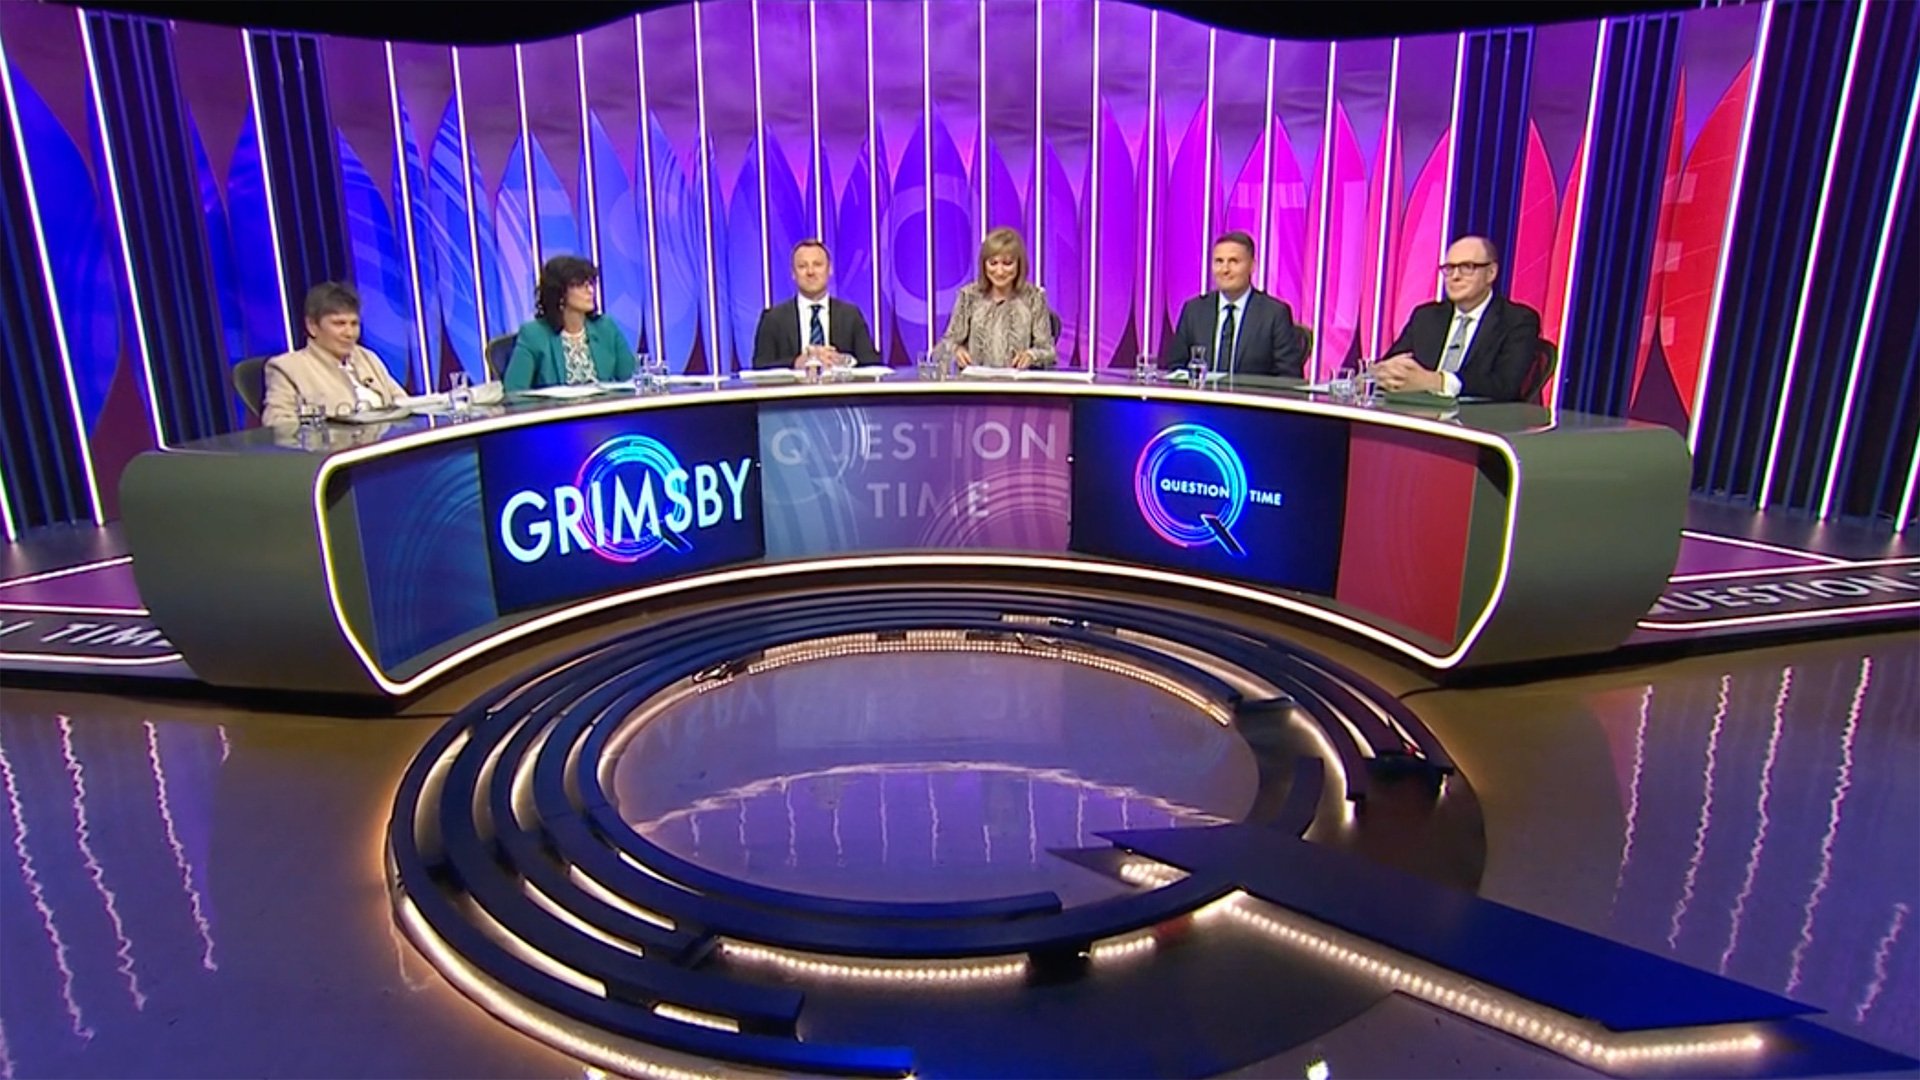 Question Time in Grimsby: Government of dithering energy crisis